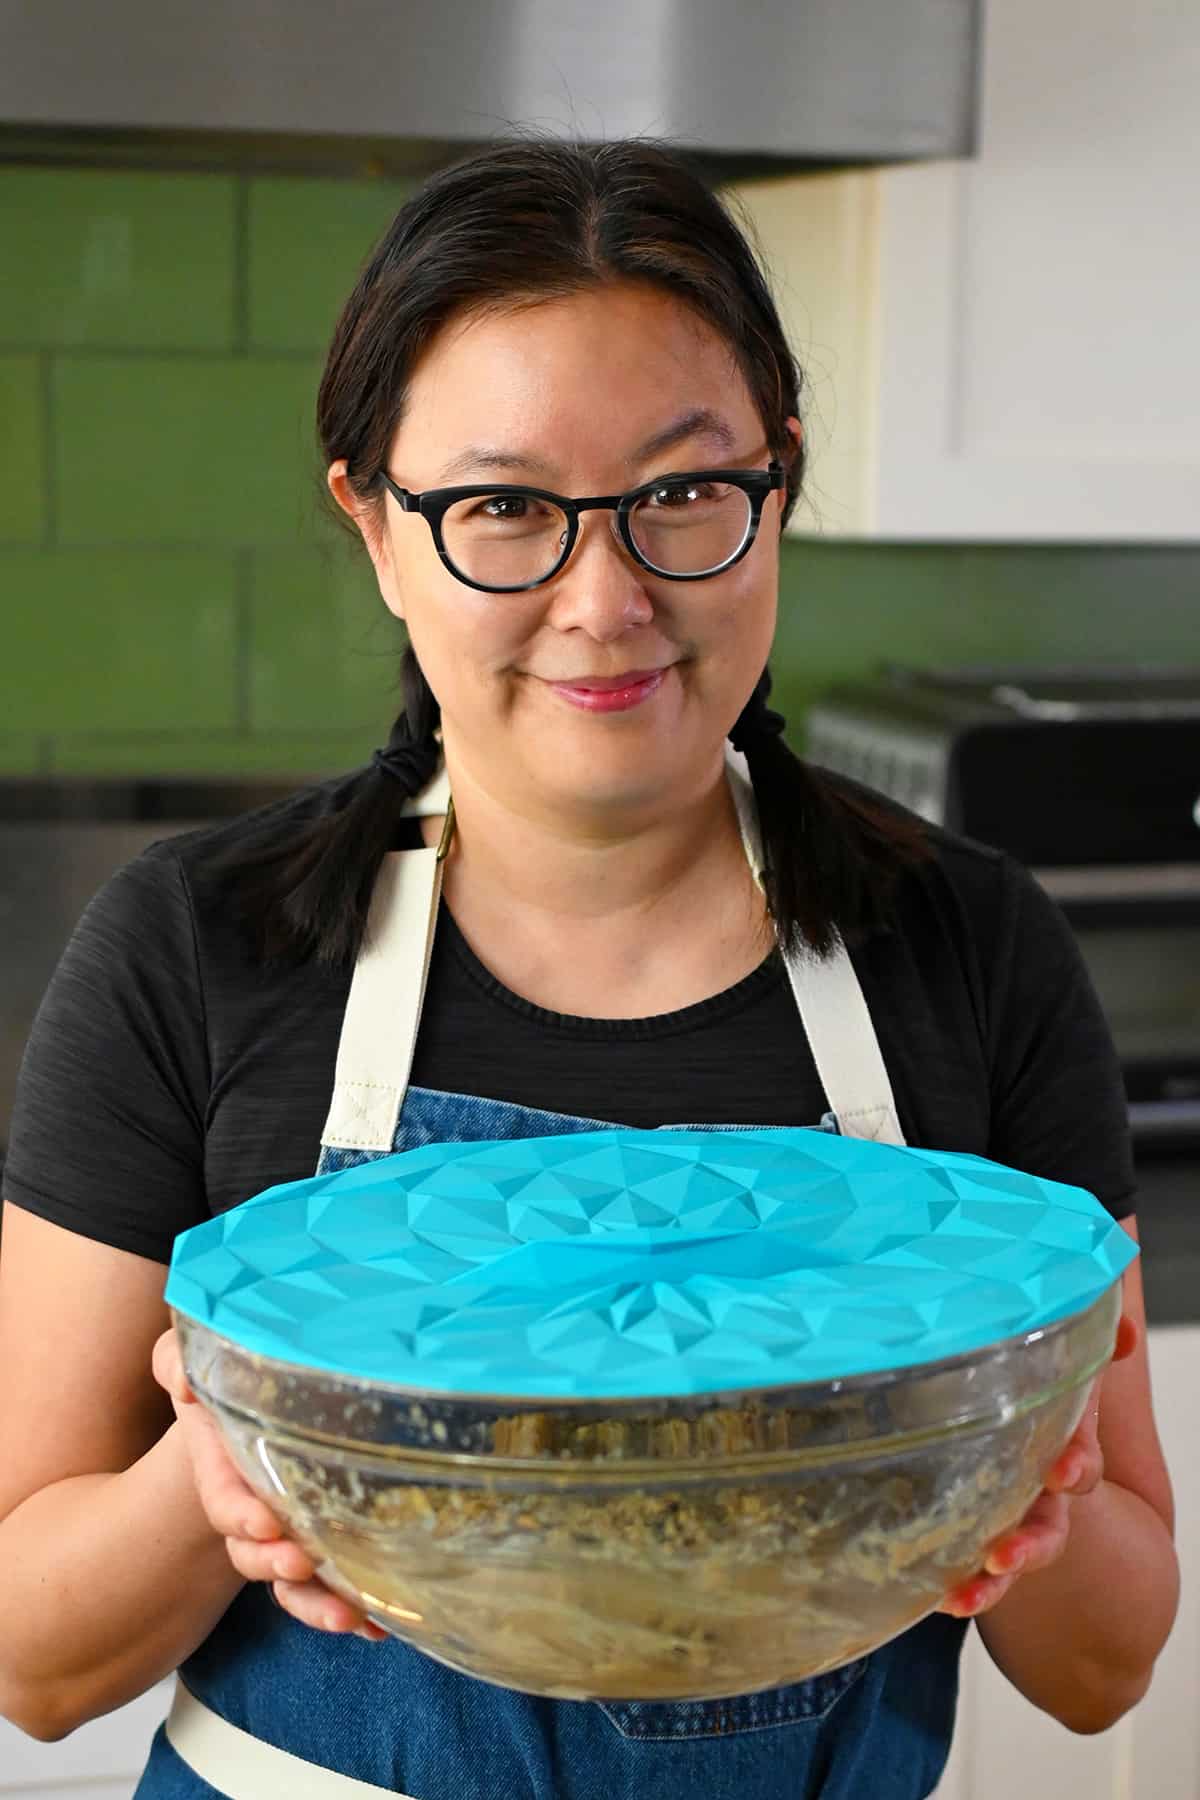 A smiling Asian woman in glasses is holding a glass mixing bowl filled with paleo banana cookie batter covered with a blue silicone lid.